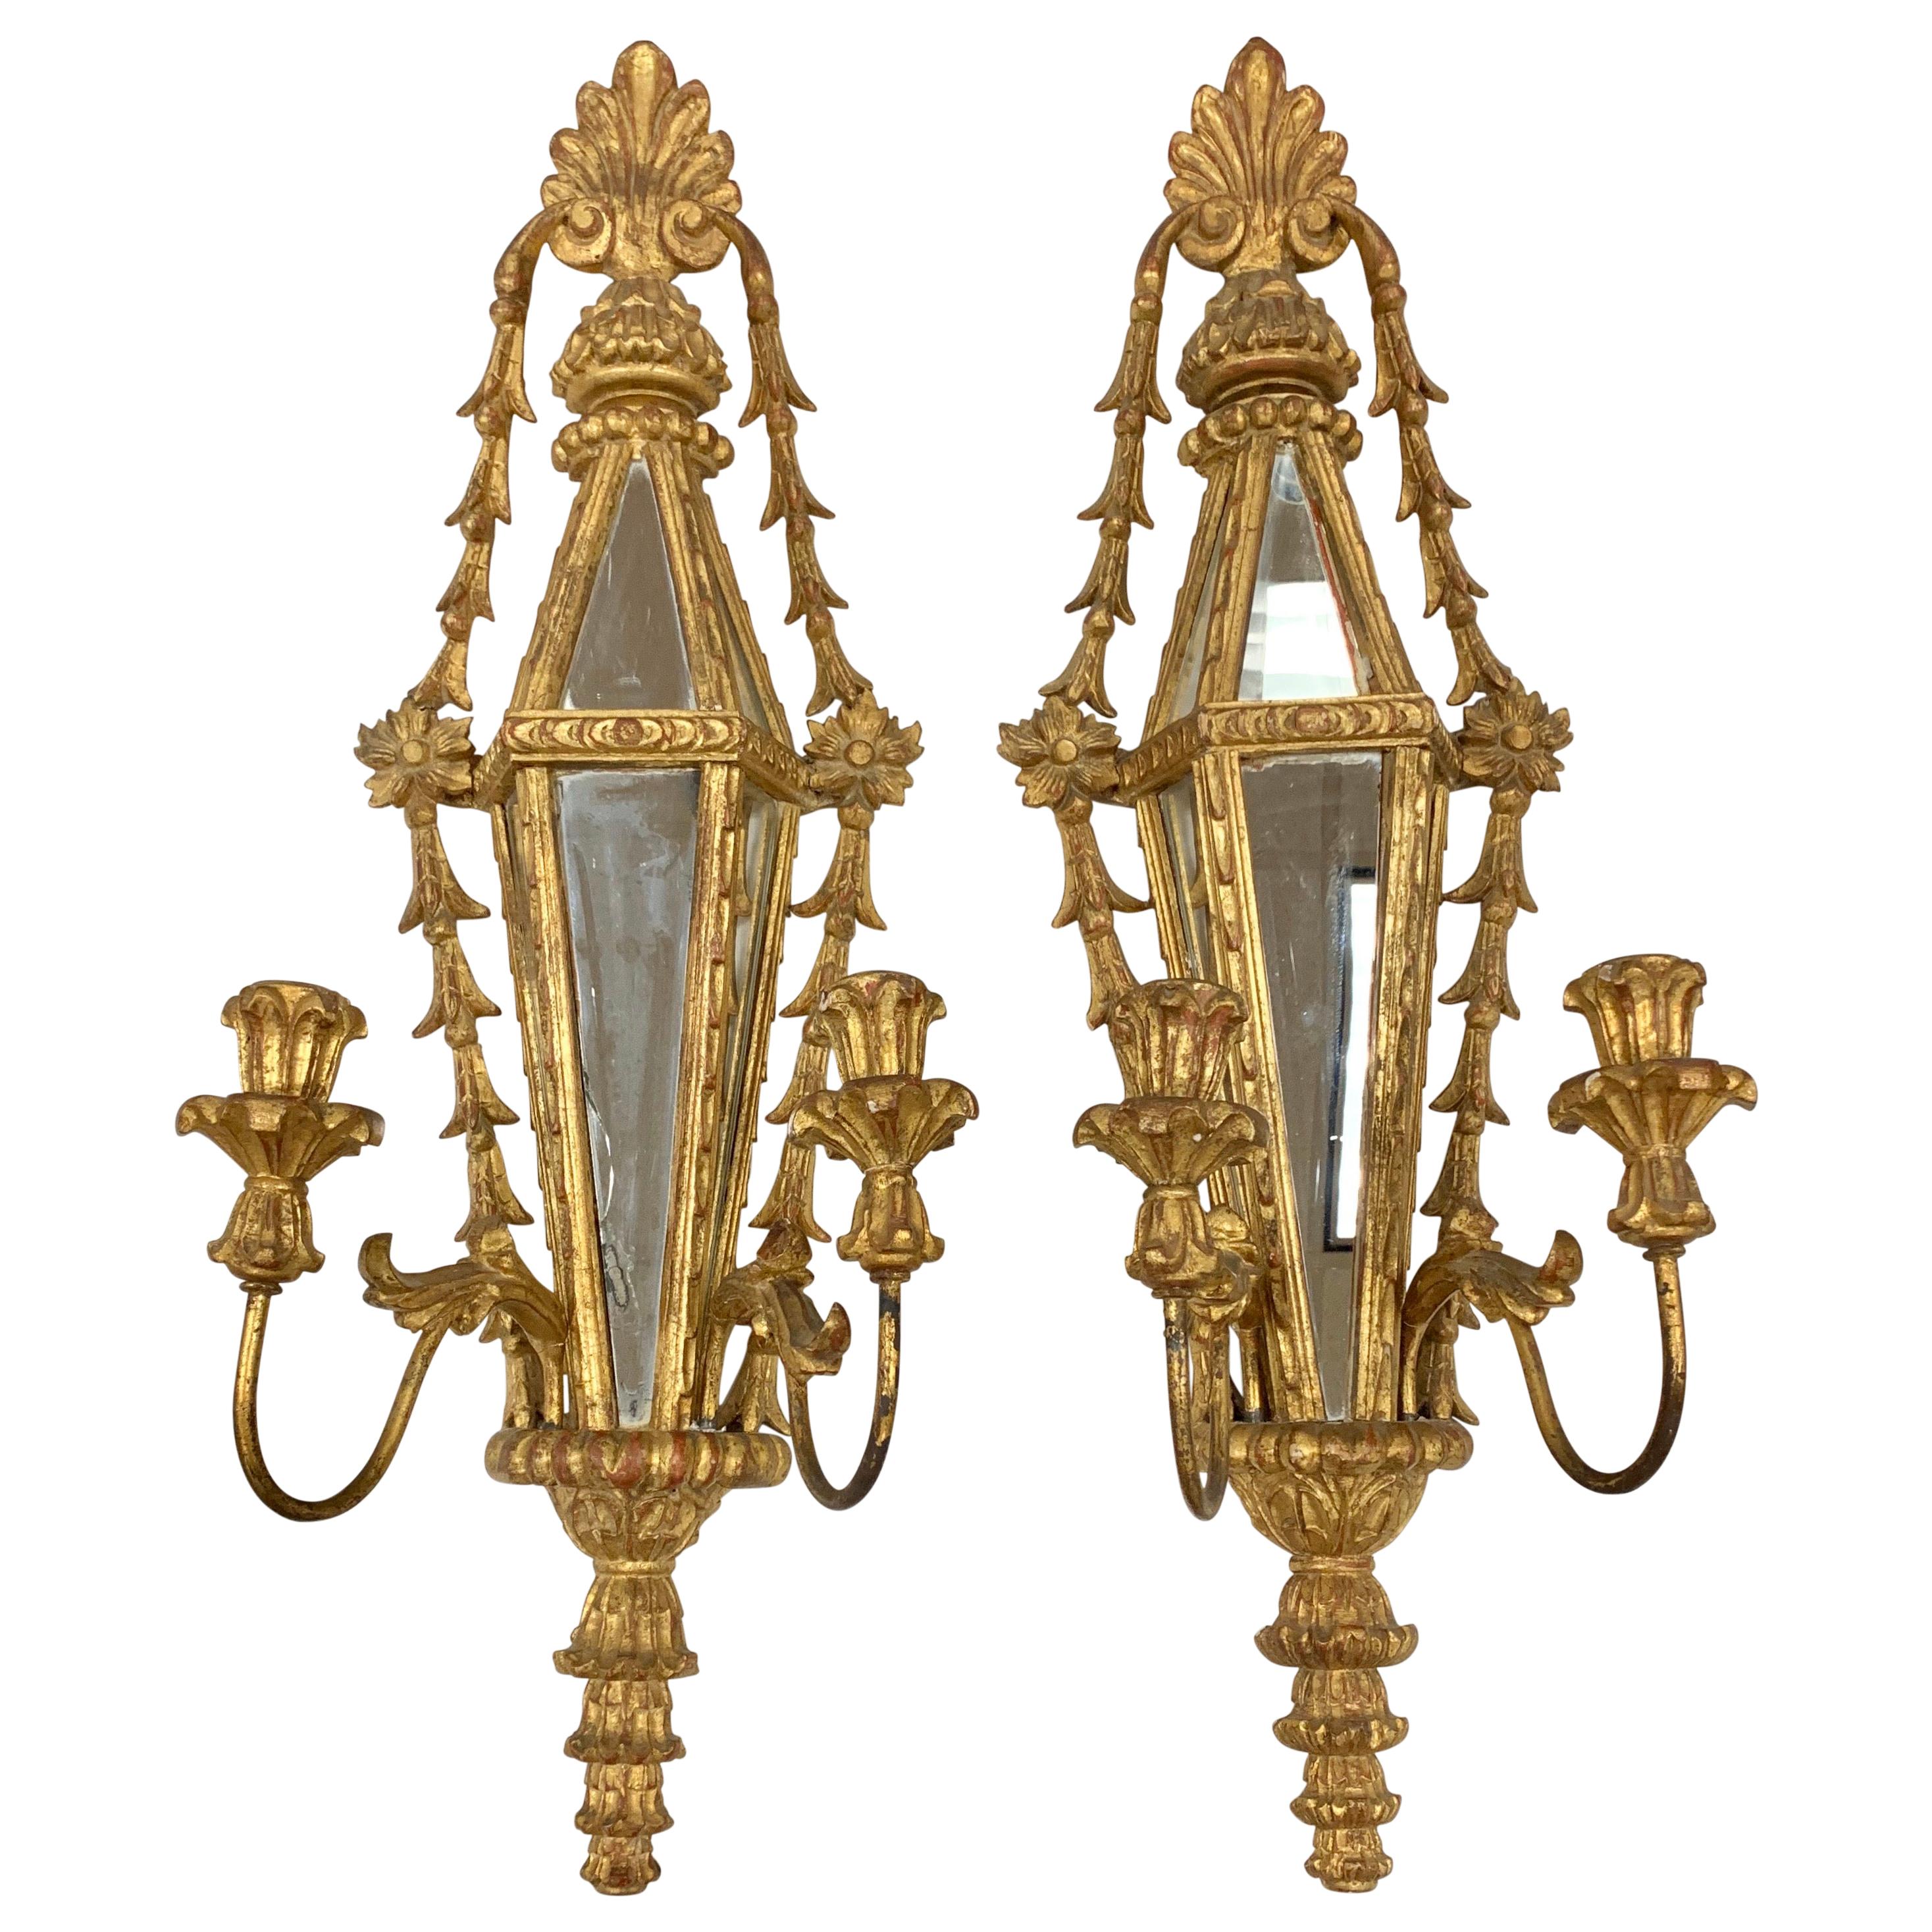 Pair of Hand Carved Giltwood Mirrored Candle Sconces, Palladio, Italy